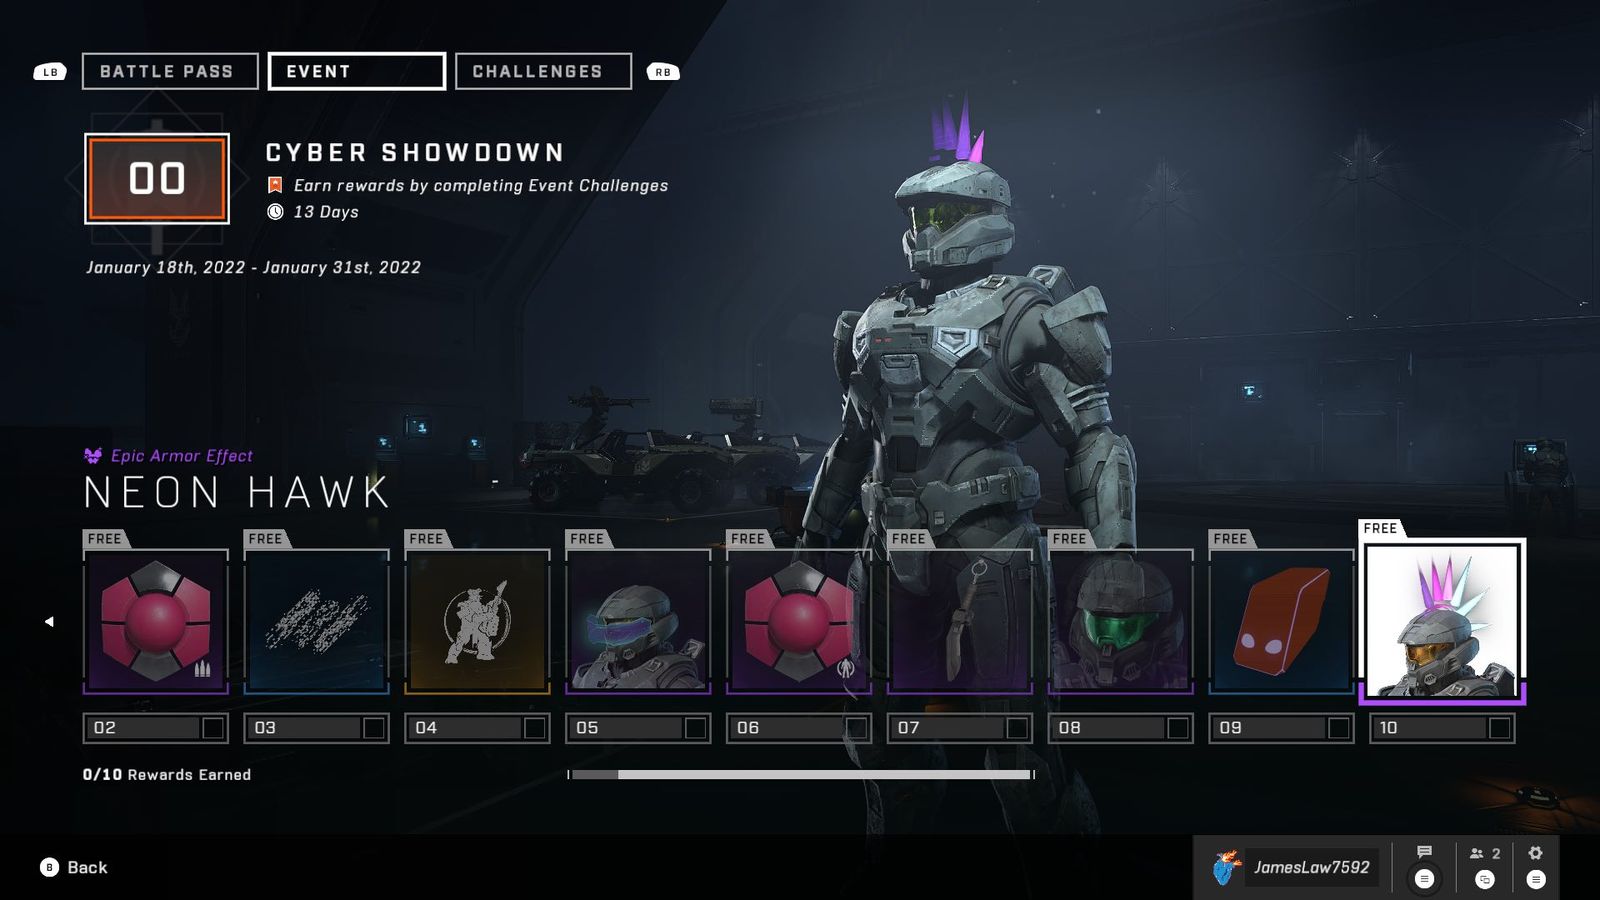 The Neon Hawk epic armour effect for the Cyber Showdown Halo Infinite event. It features a glowing multicoloured mohawk on top of the Spartan's head.